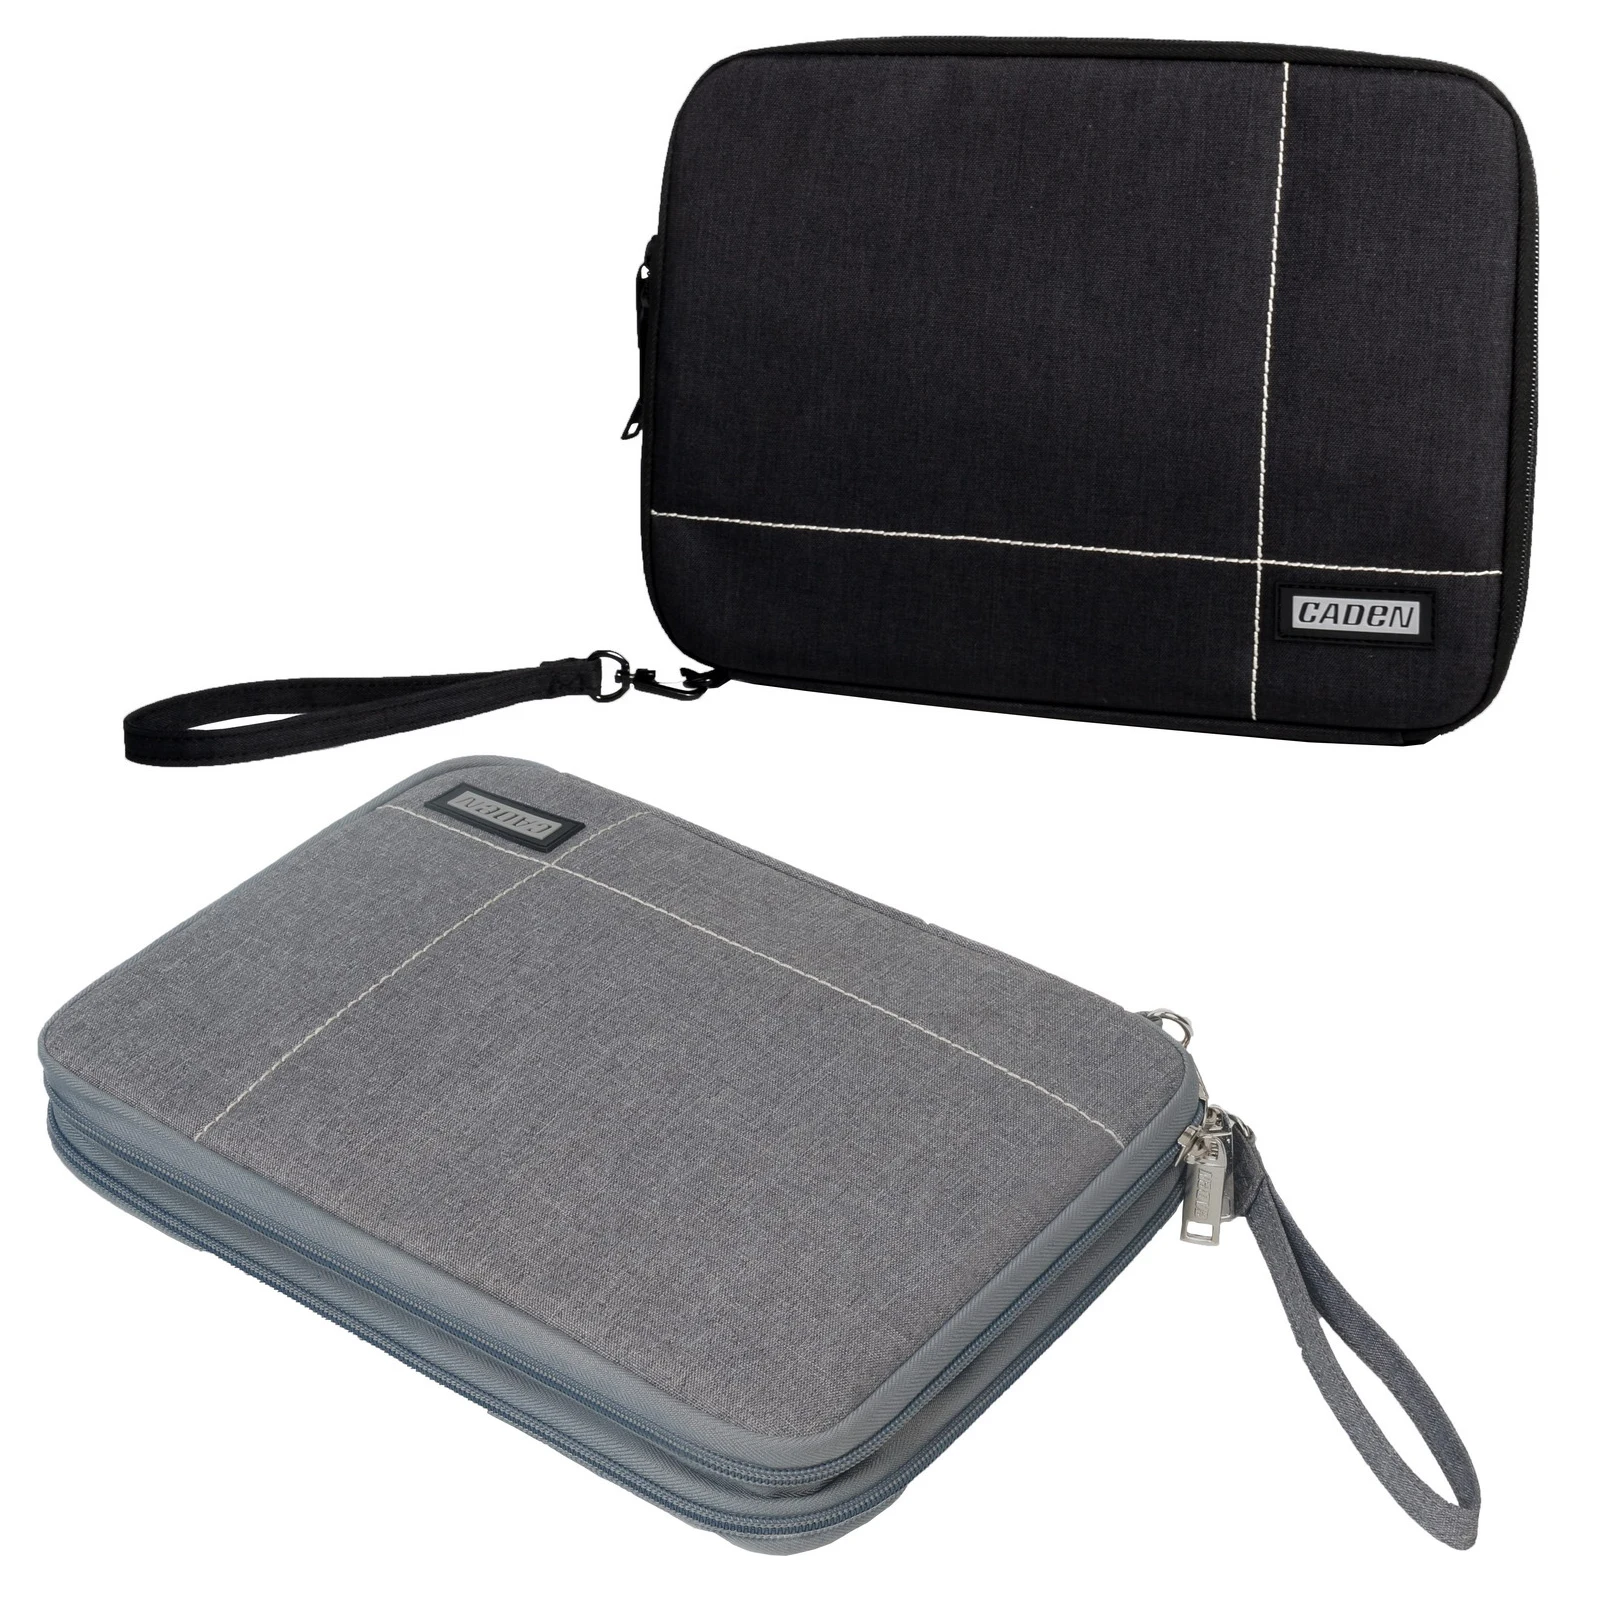 

Camera Accessories Storage Bag Women Men Electronic Cases Hard Drive Cables USB Flash Pouches For 7.9 - 9.7 Inches iPad Mini Air